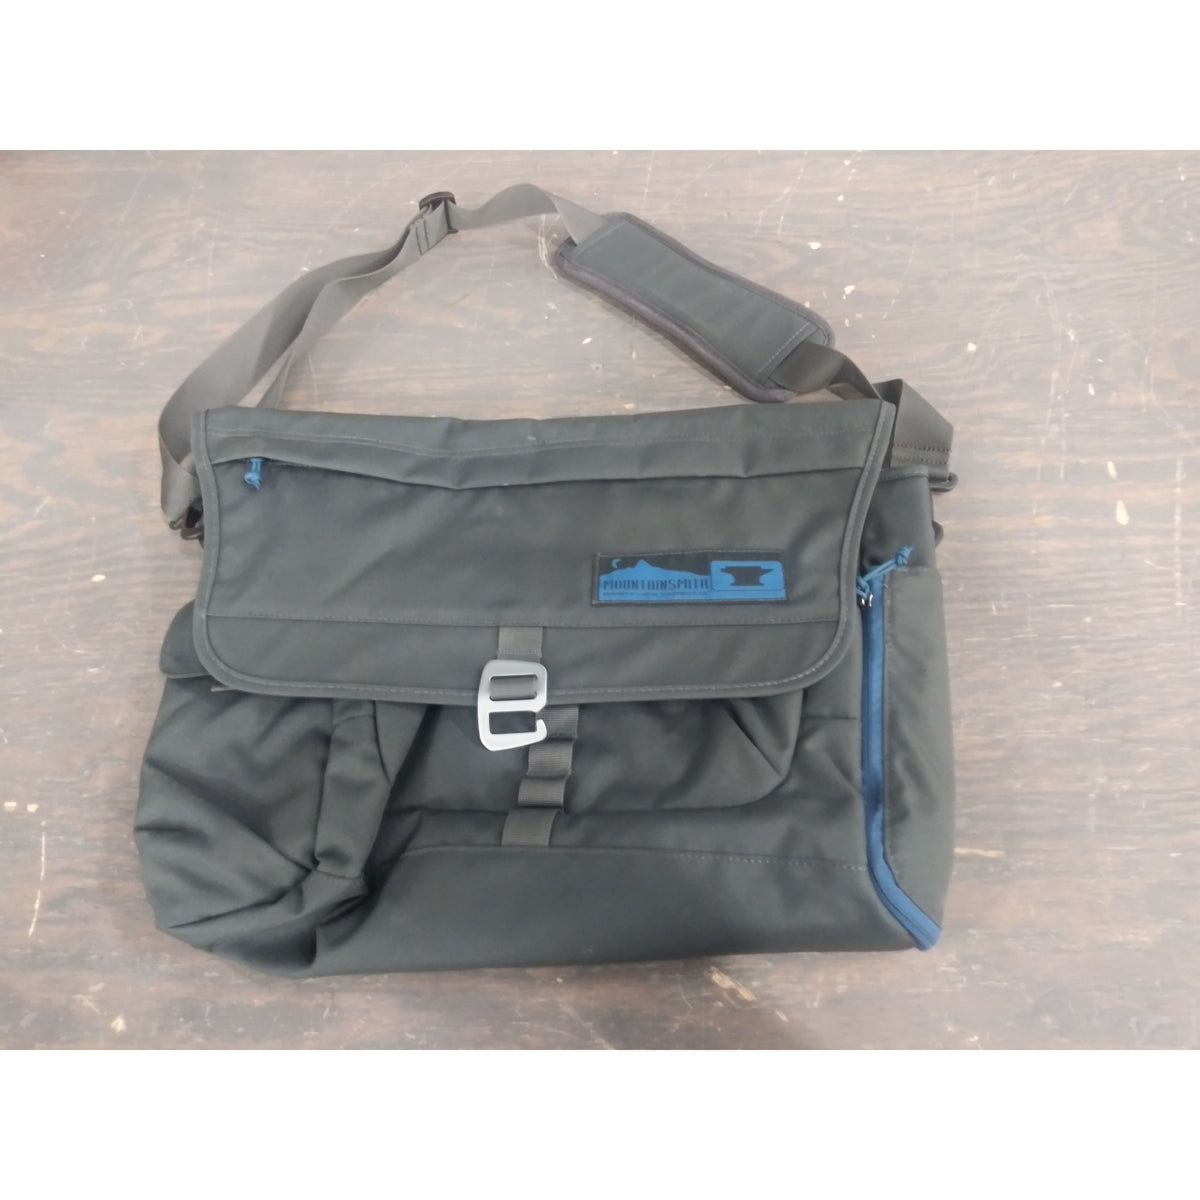 Mountainsmith Adventure Office Messenger Bag - Anvil Grey - Used - Acceptable